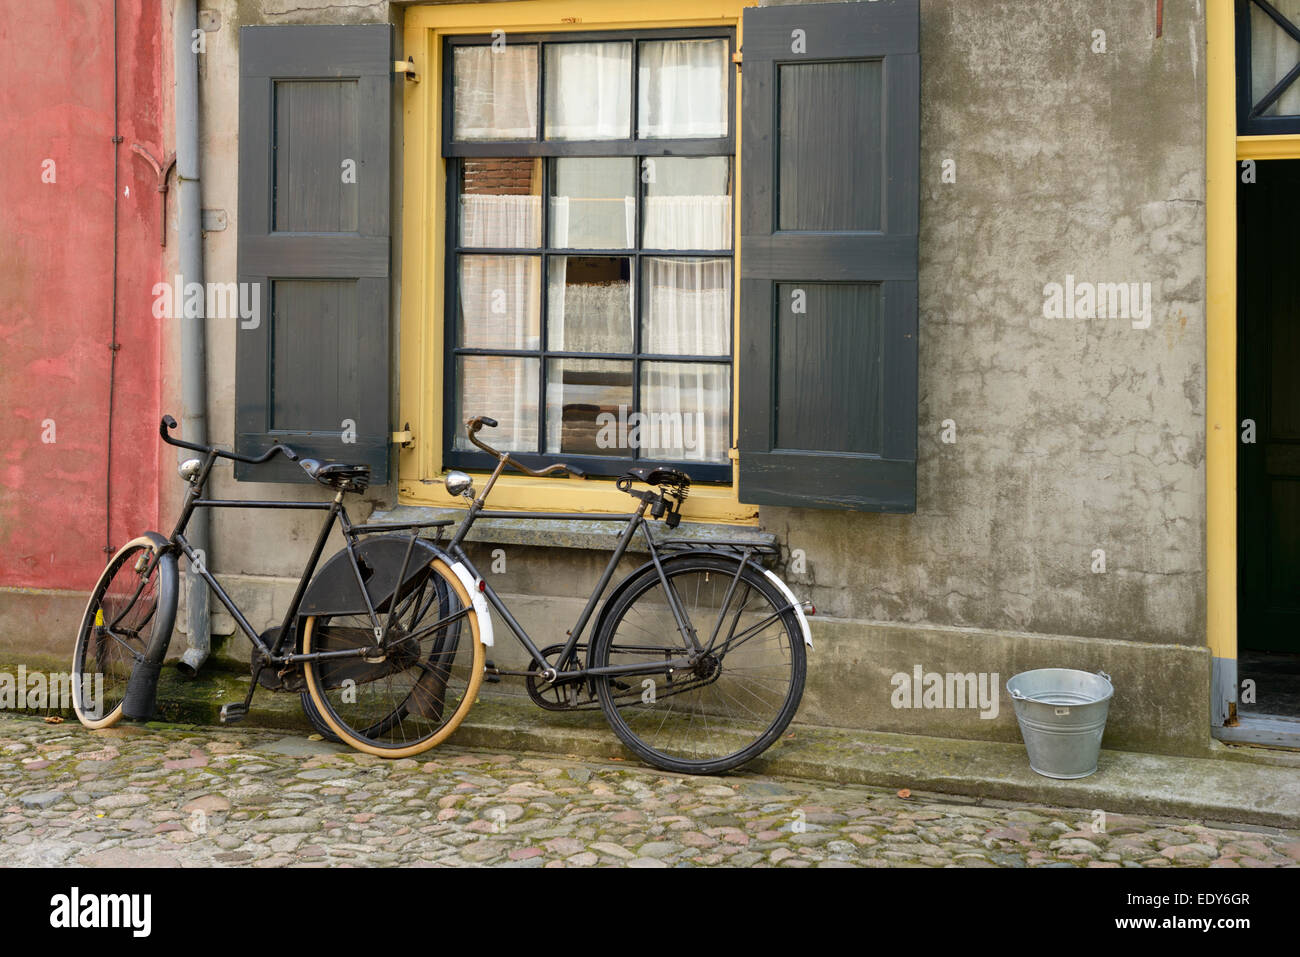 Traditional bicycles outside a building, Zuiderzee open air museum, Lake Ijssel, Enkhuizen, North Holland, Netherlands, Europe Stock Photo